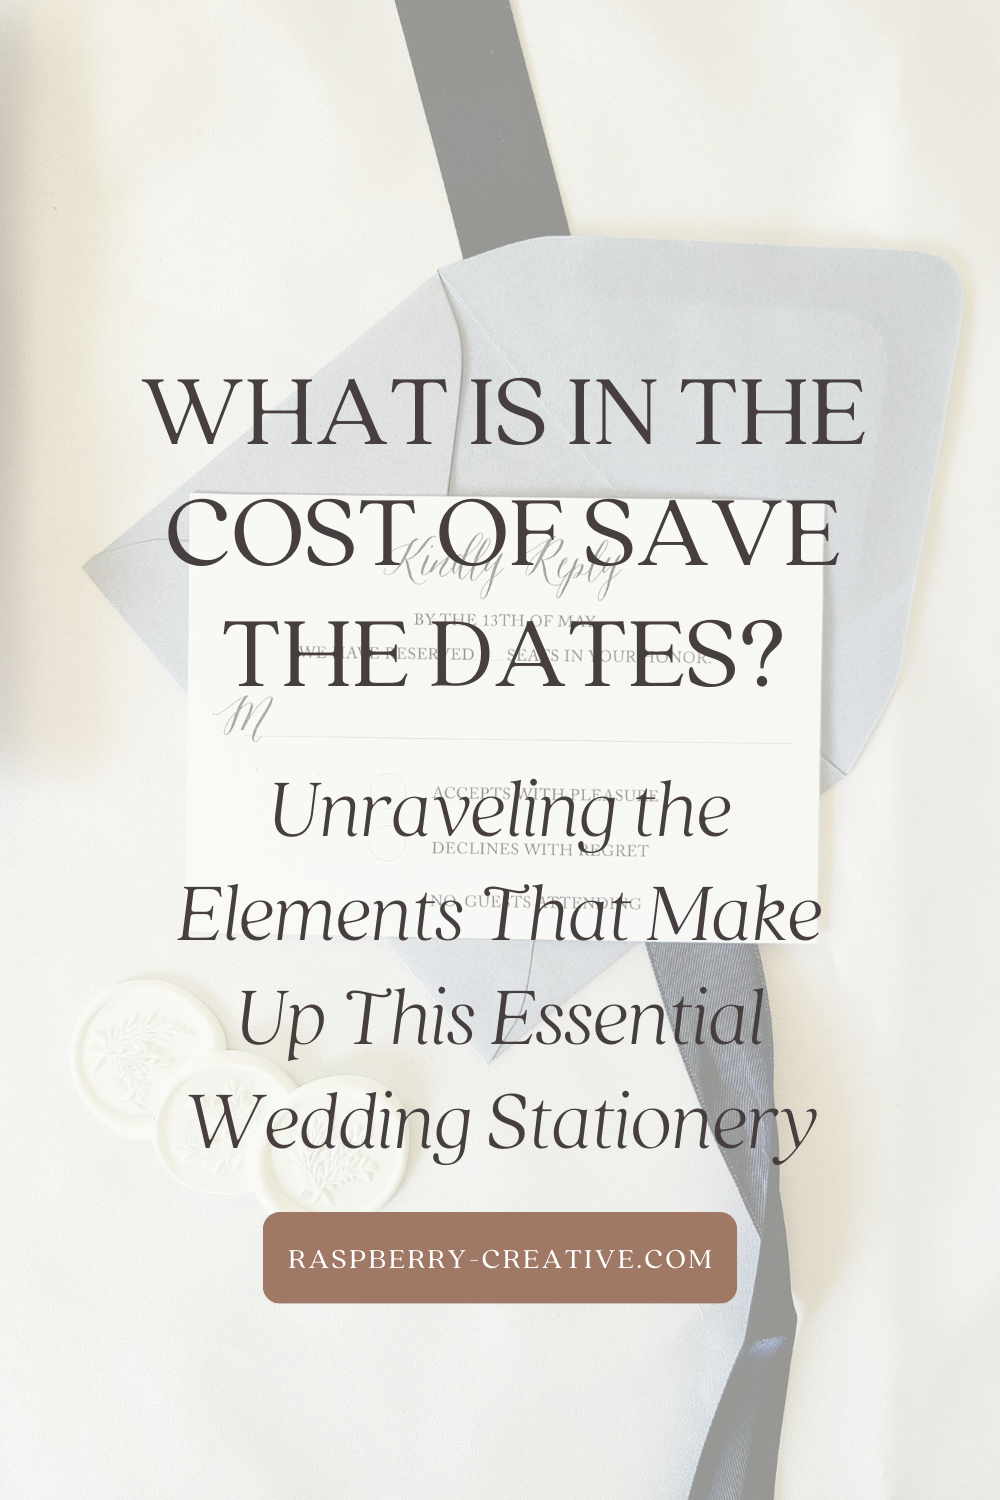 What Is in the Cost of Save the Dates